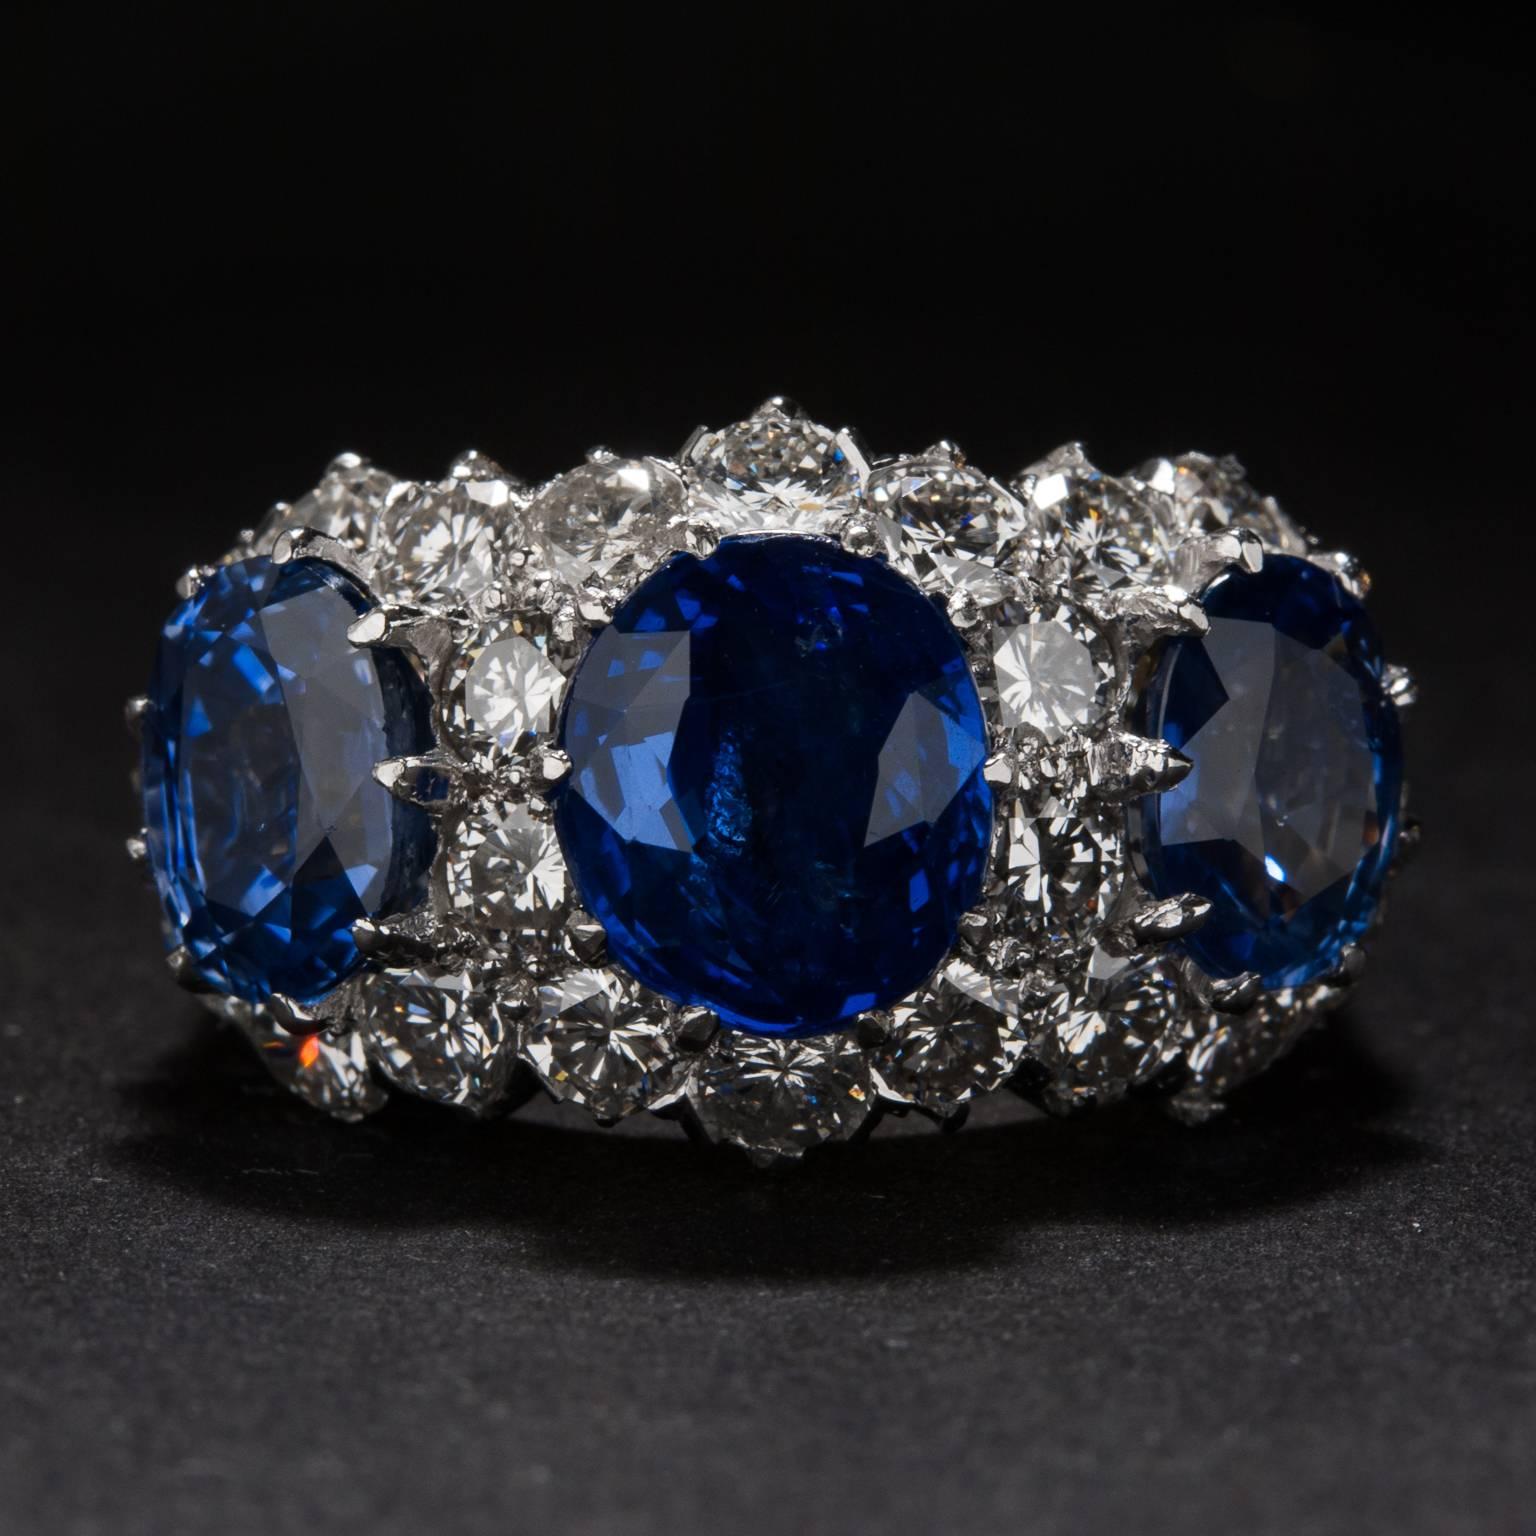 This stunning ring features 3 beautiful sapphires weighing a total of 6.37 carats and 2.74 total carats of accent diamonds. The mounting is crafted in platinum and 18k yellow gold. This ring is currently size 7.5 and may be sized to fit. 